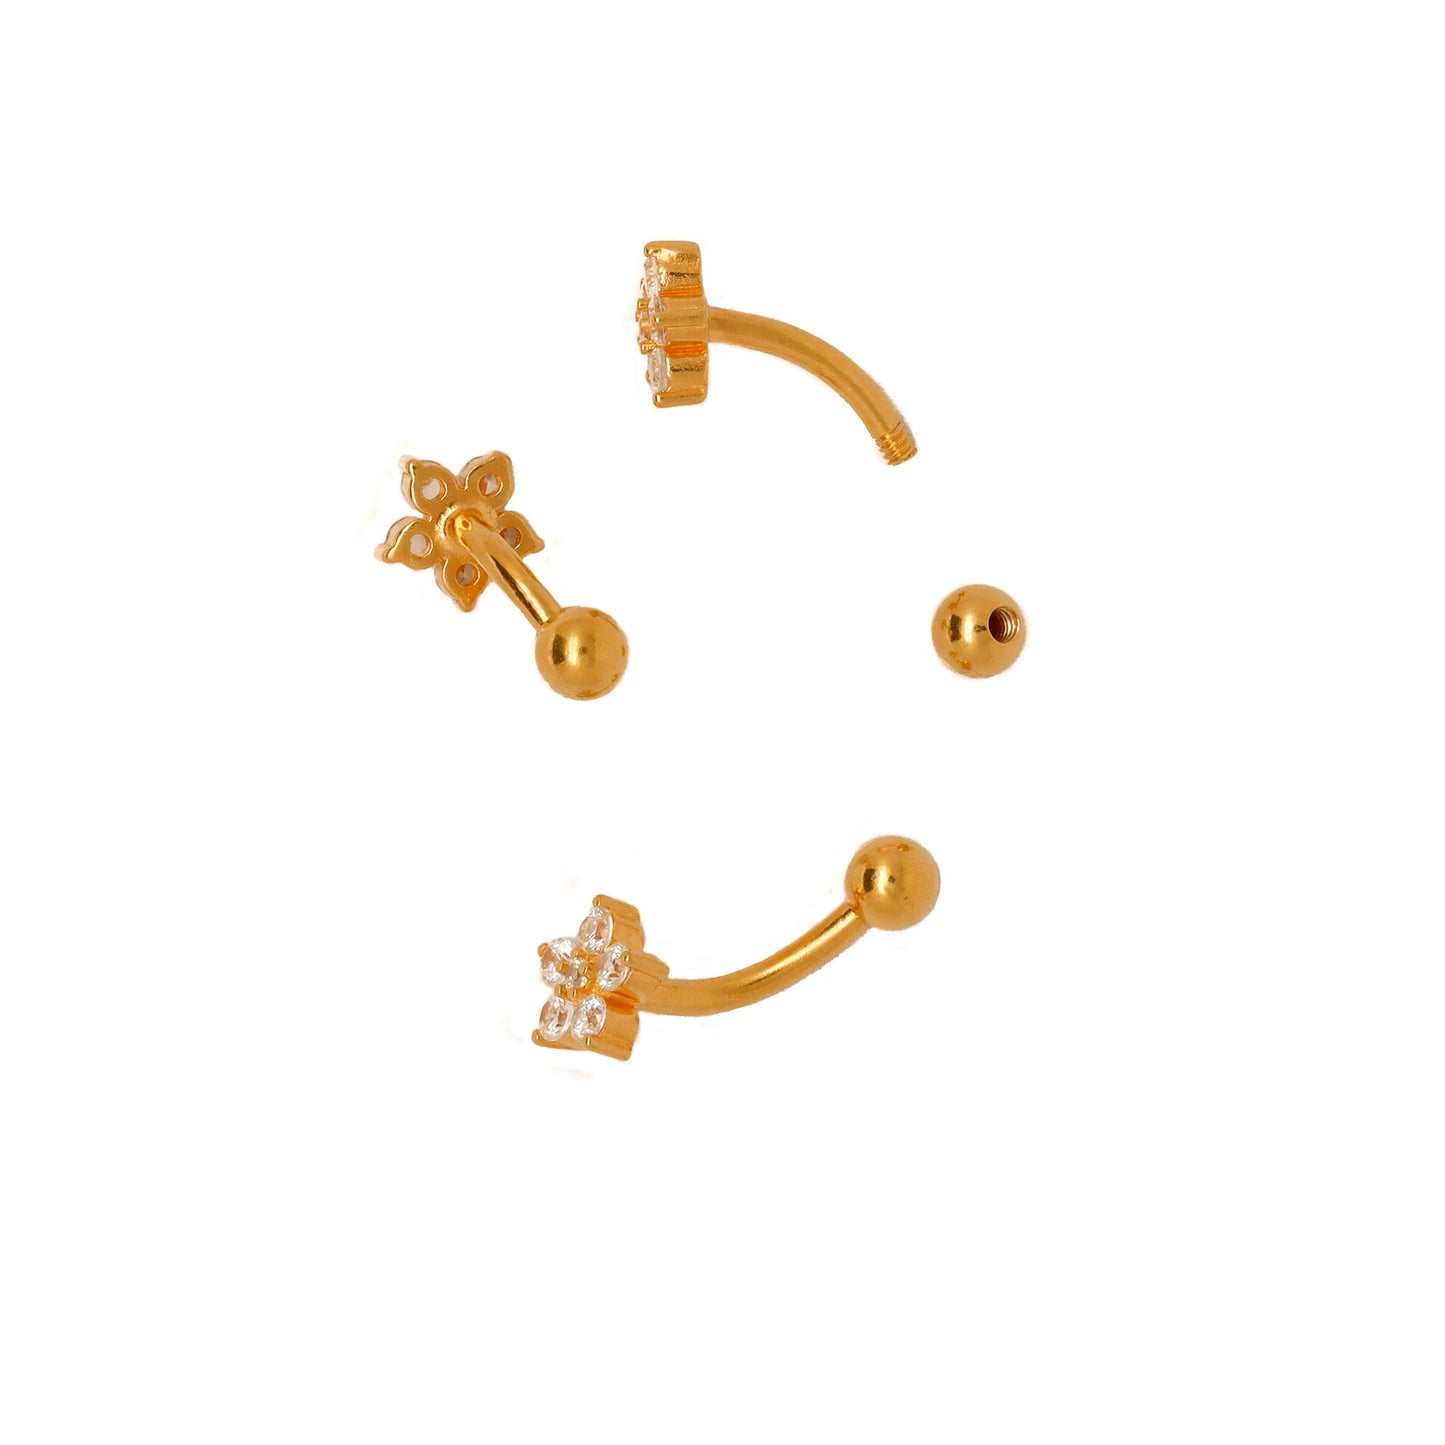 Vermeil | 24k Gold Coated 925 Silver 16G 14G Petite Flower Reverse Belly Ring | 6mm 1/4" 8mm 5/16" 10mm 3/8" 12mm 15/32" - Sturdy South